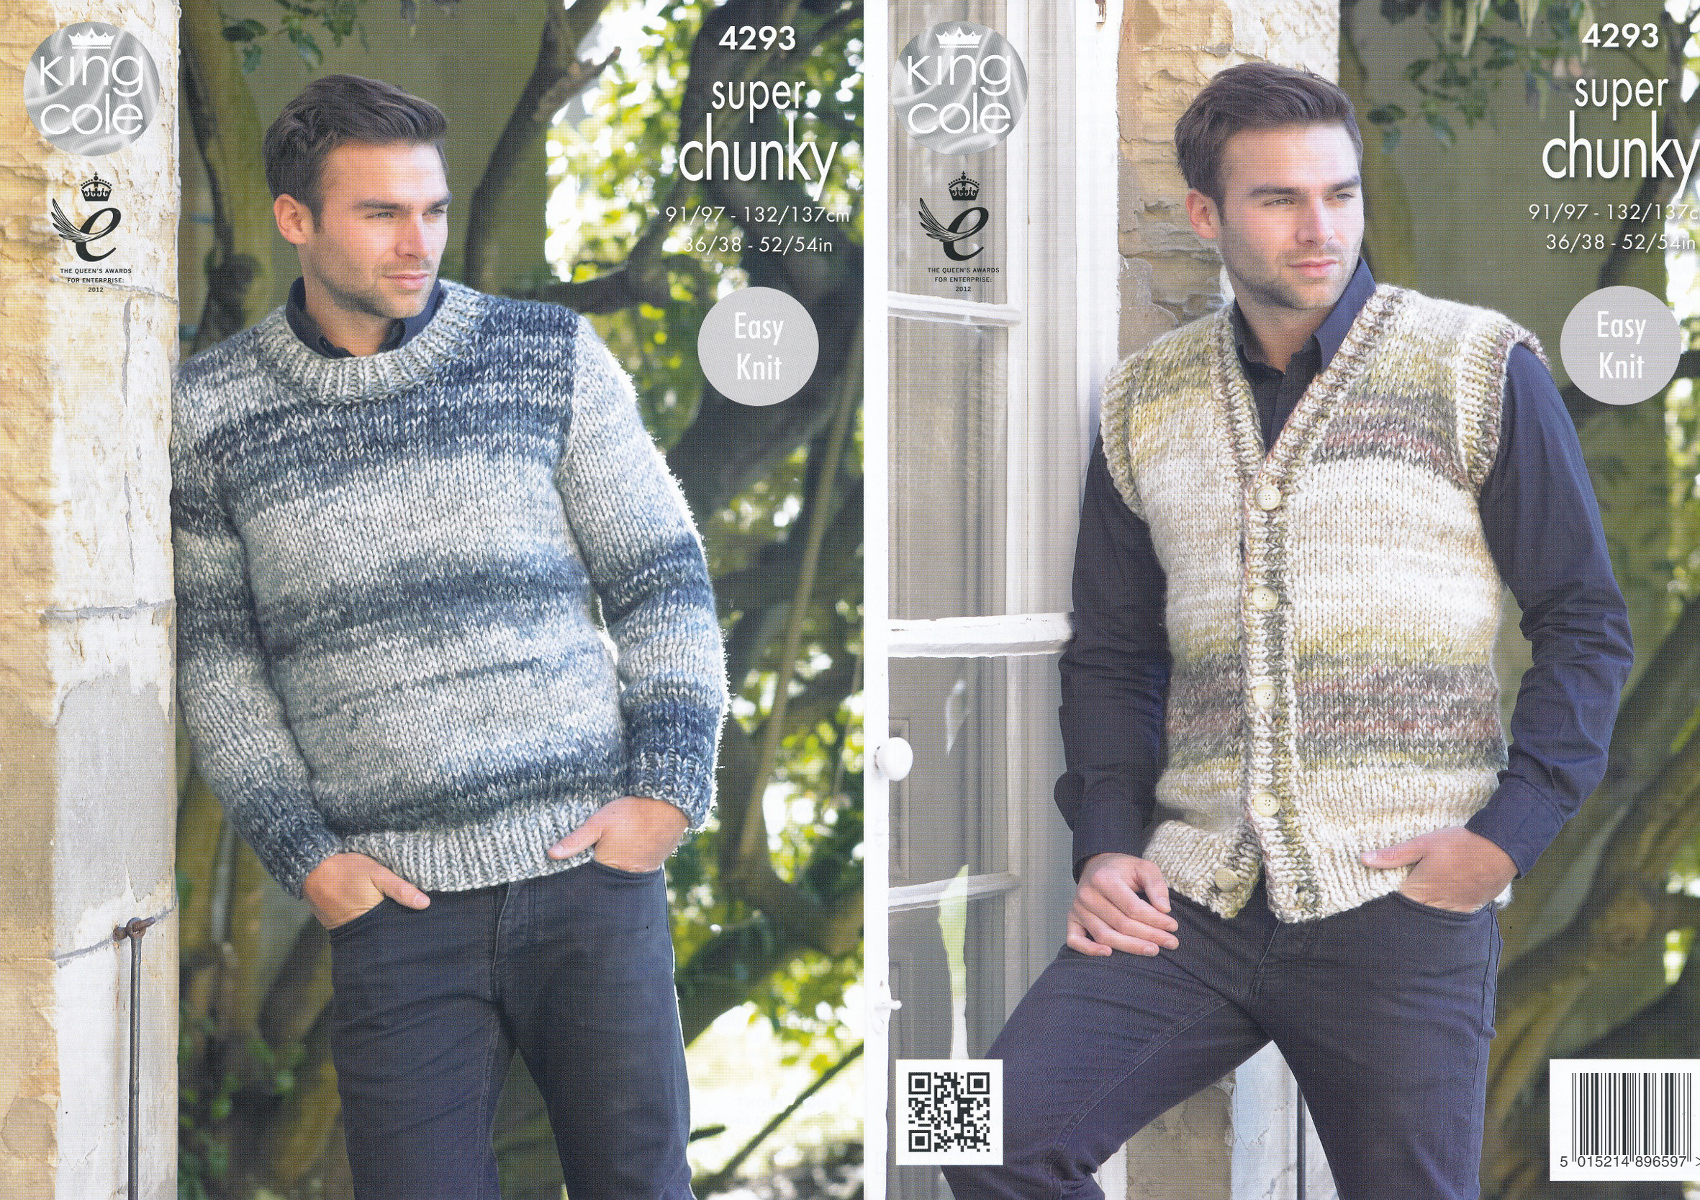 Knit Vest Patterns Details About King Cole Mens Super Chunky Knitting Pattern Easy Knit Jumper Waistcoat 4293